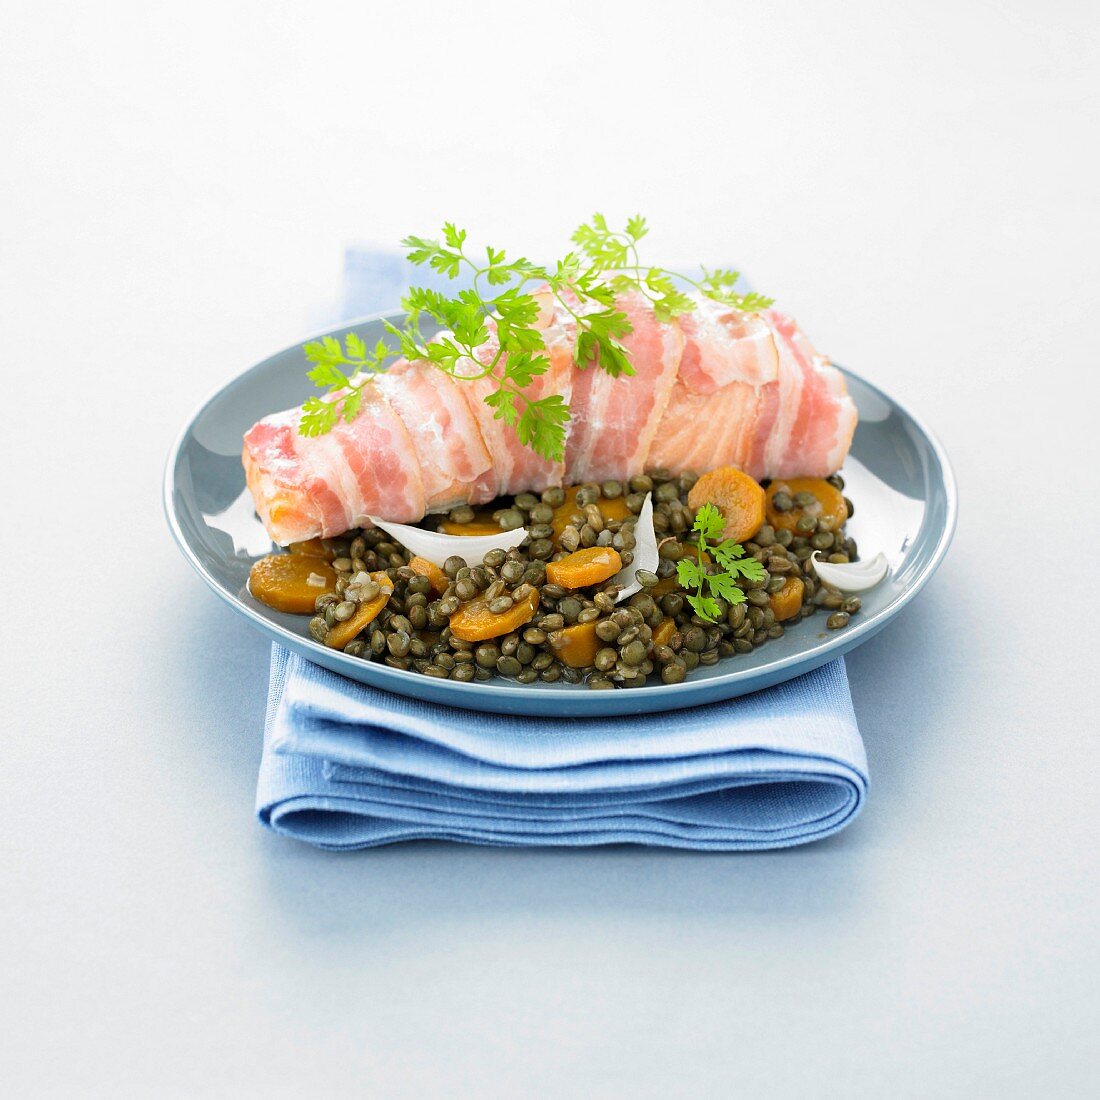 Piece of salmon wrapped in bacon, lentils with carrots